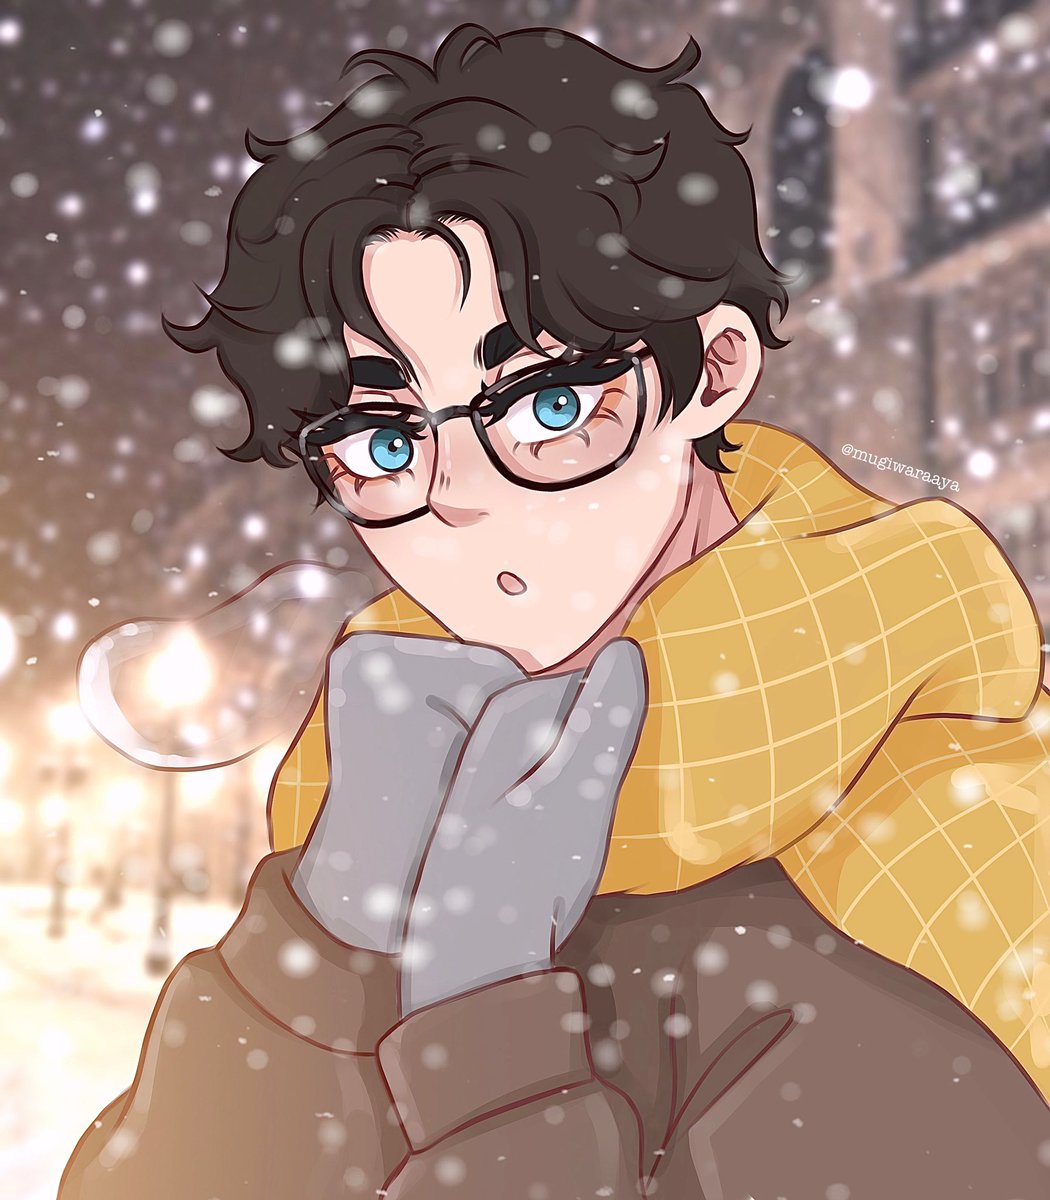 「time to bundle up ❄️ (part 1 - akaashi)
」|cat 🪴 @ uni/comms/mailing ordersのイラスト